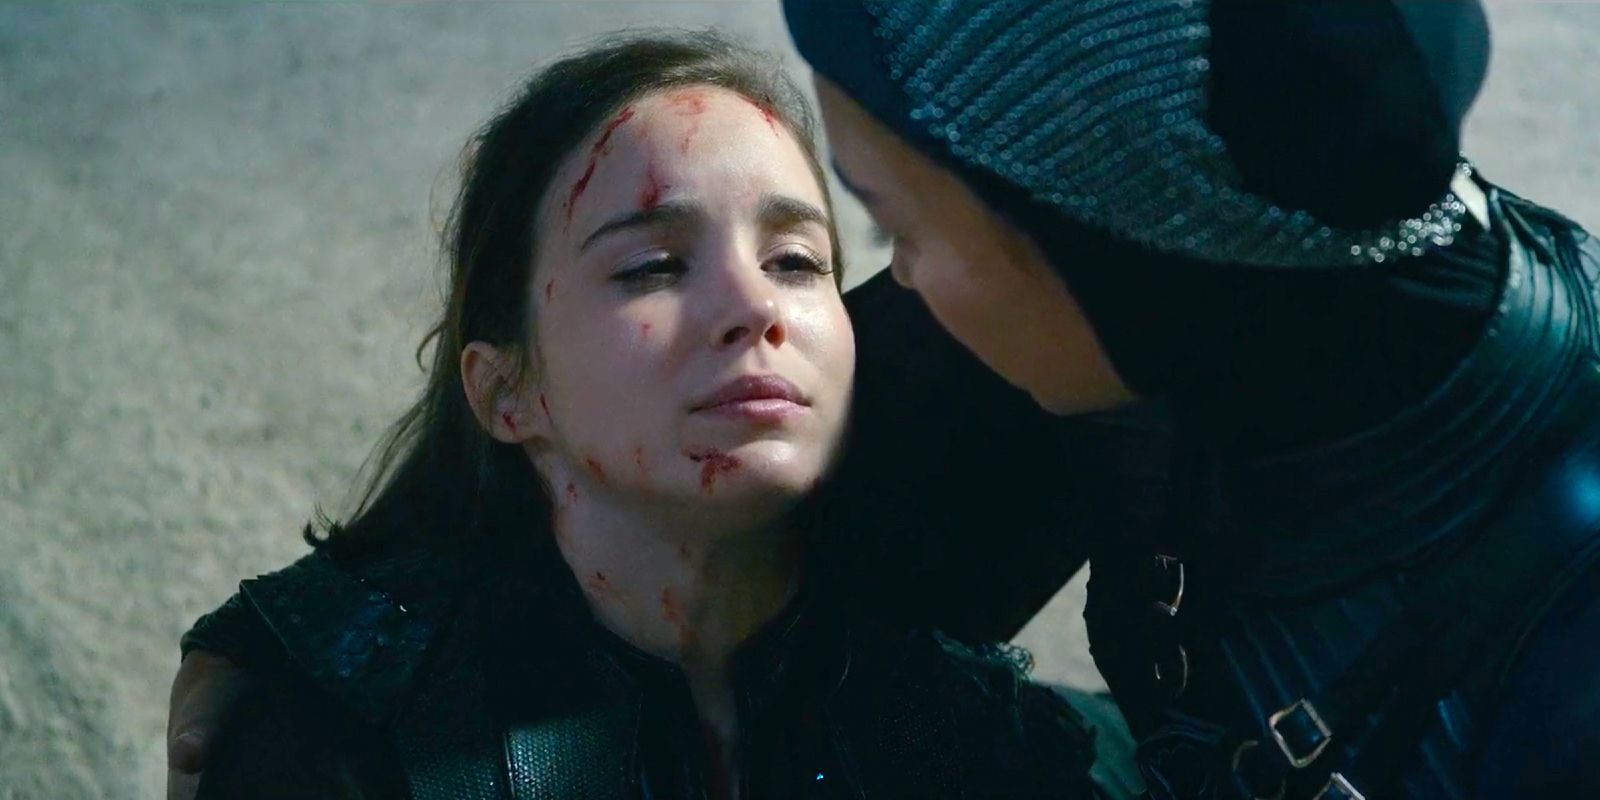 Ava laying bloodied in Beatrice's arms after defeating Adriel in Warrior Nun season 2 episode 8.